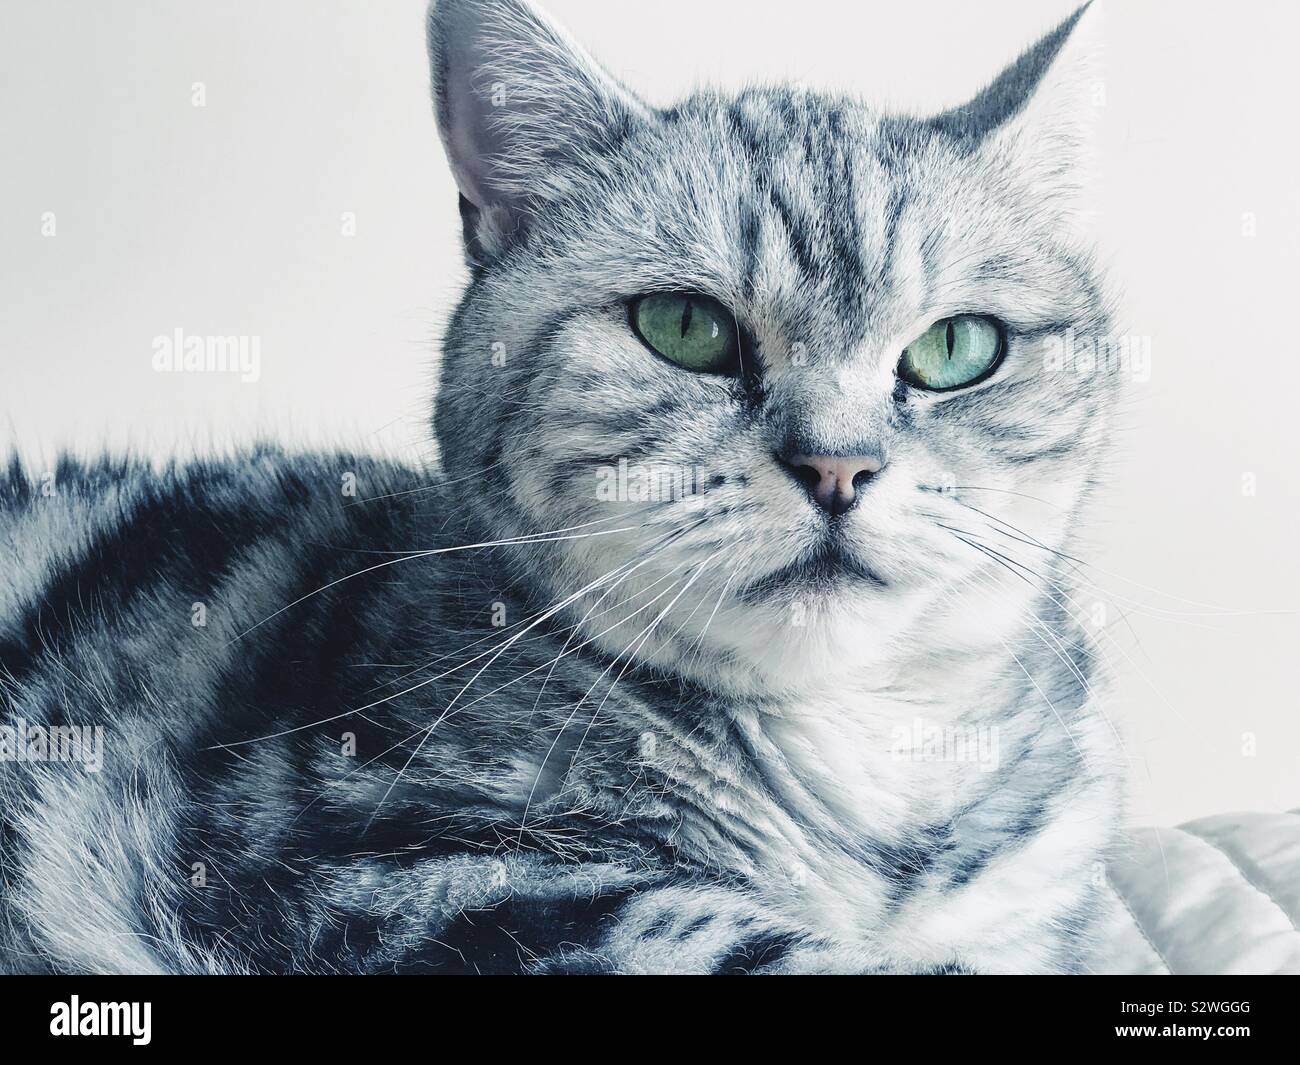 British shorthair silver tabby cat sitting on a bed Banque D'Images